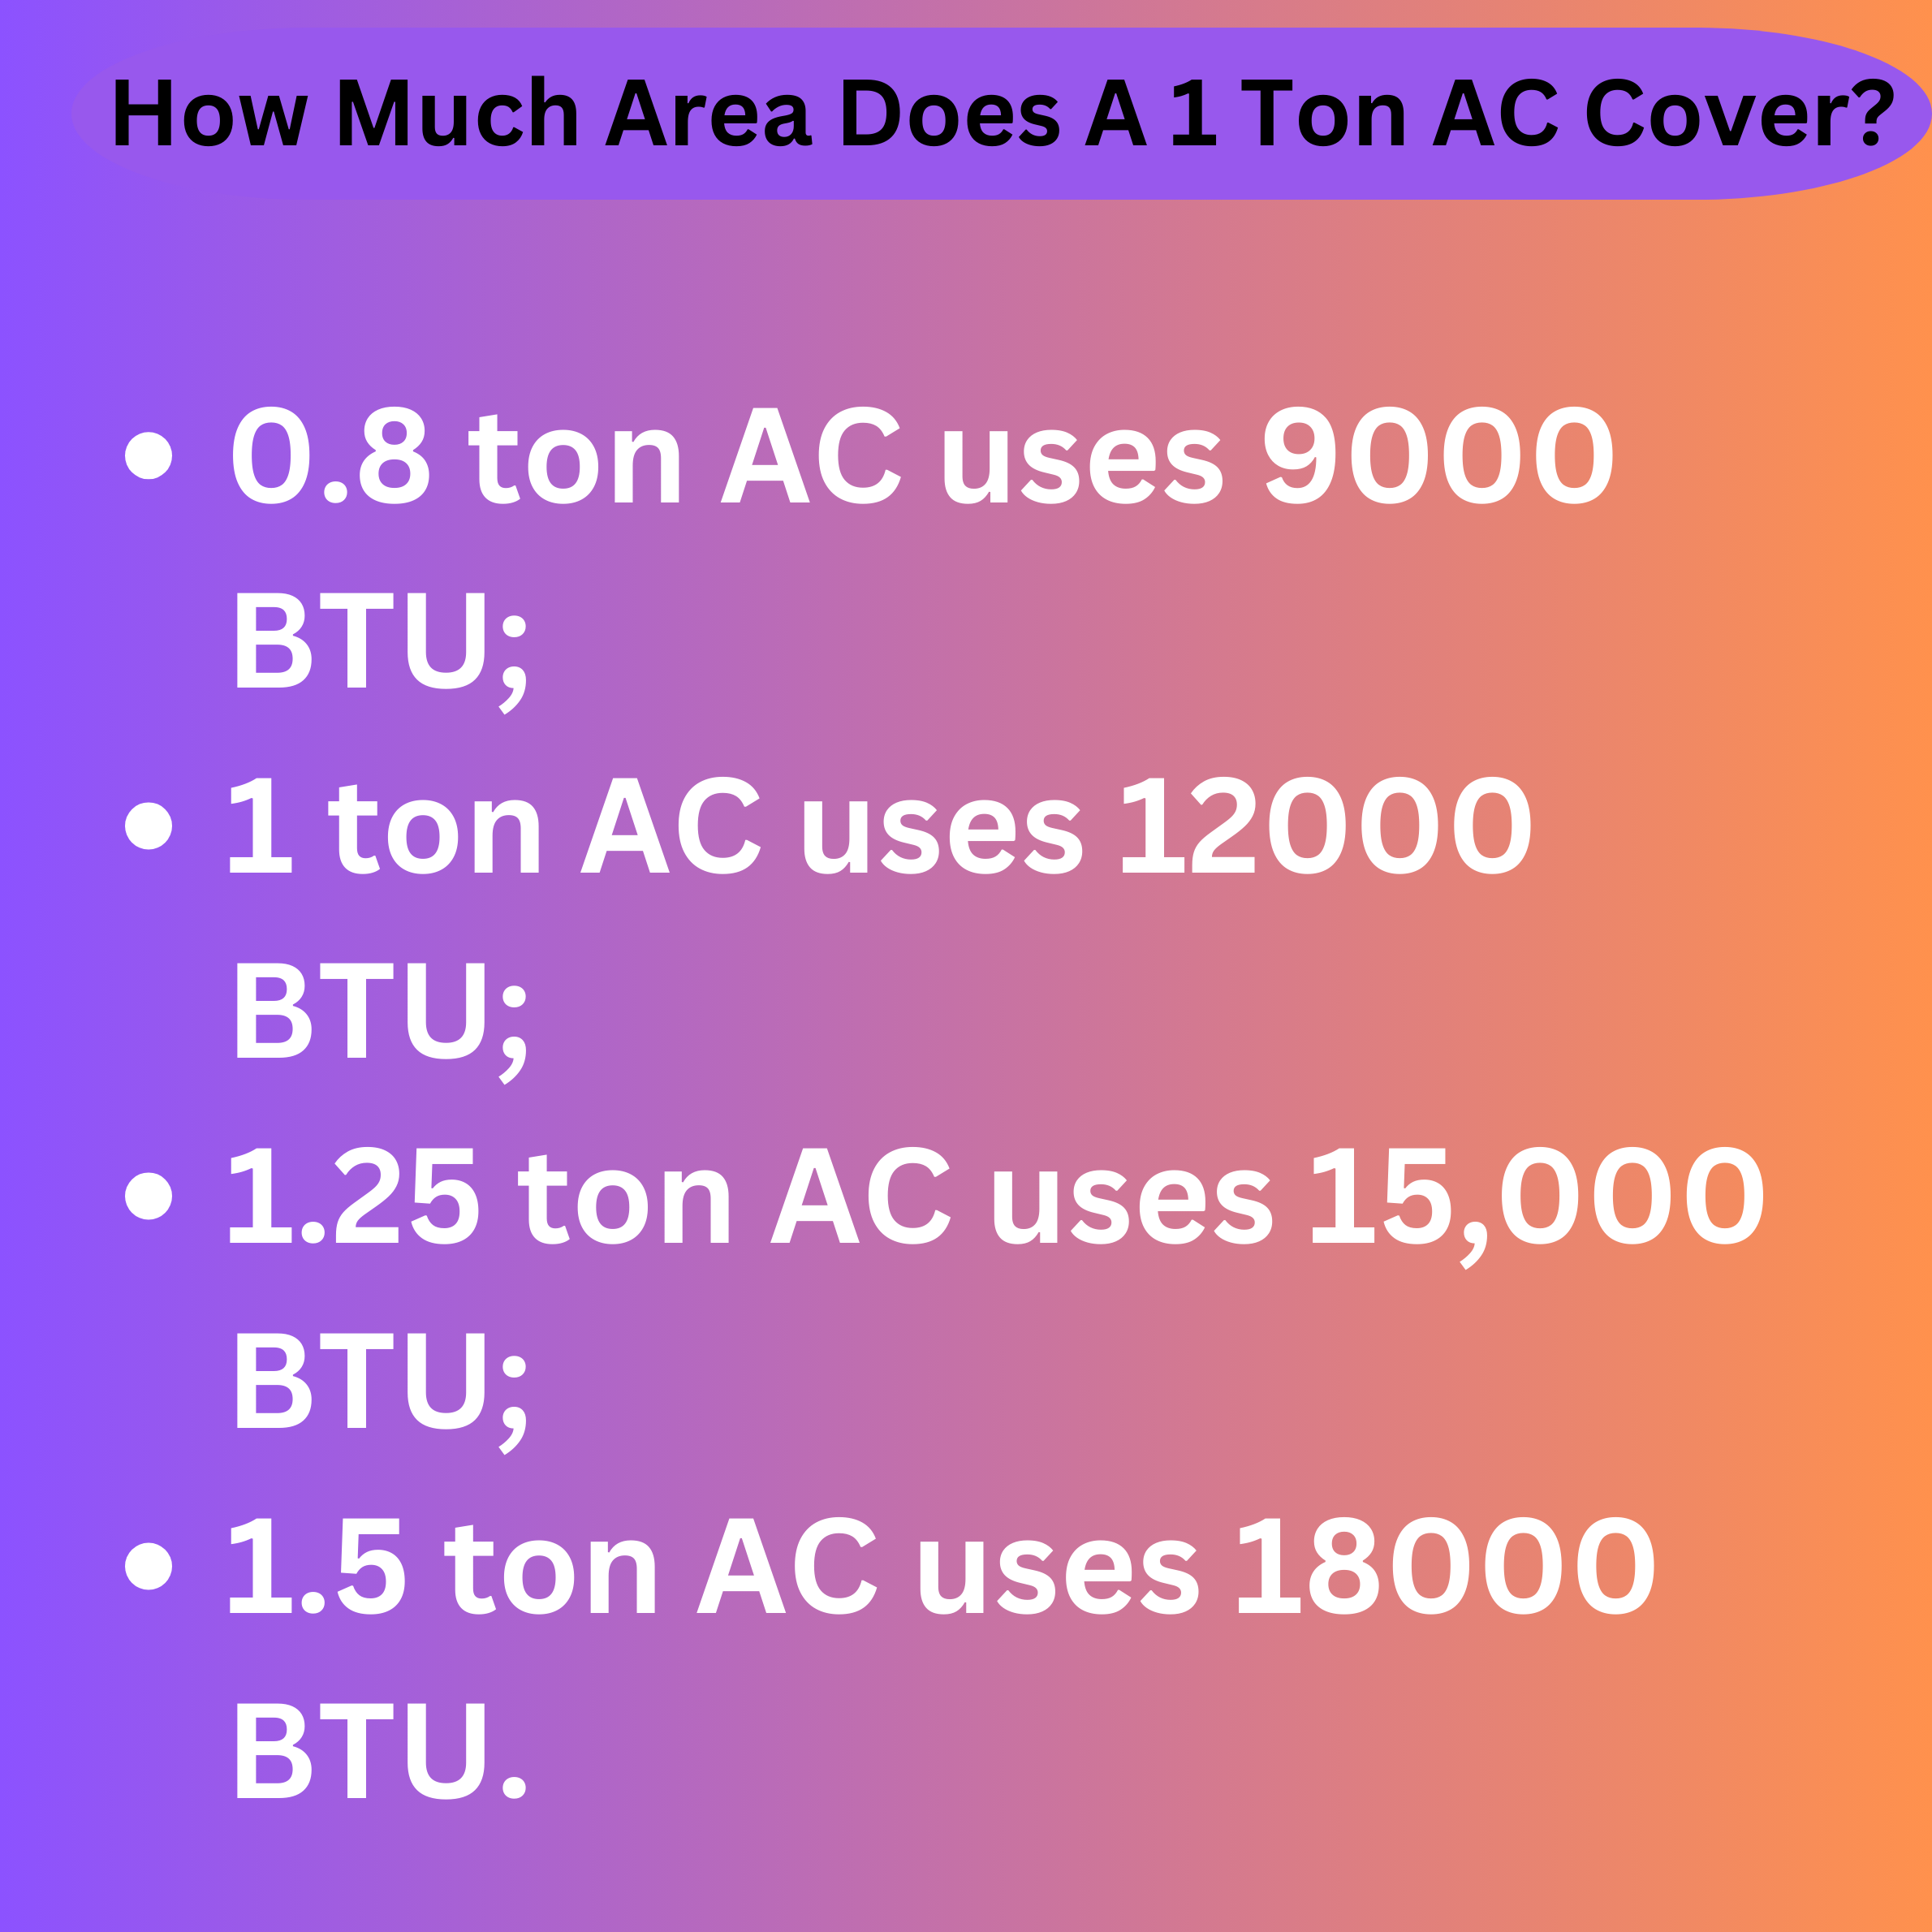 How Much Area Does A 1 Ton AC Cover